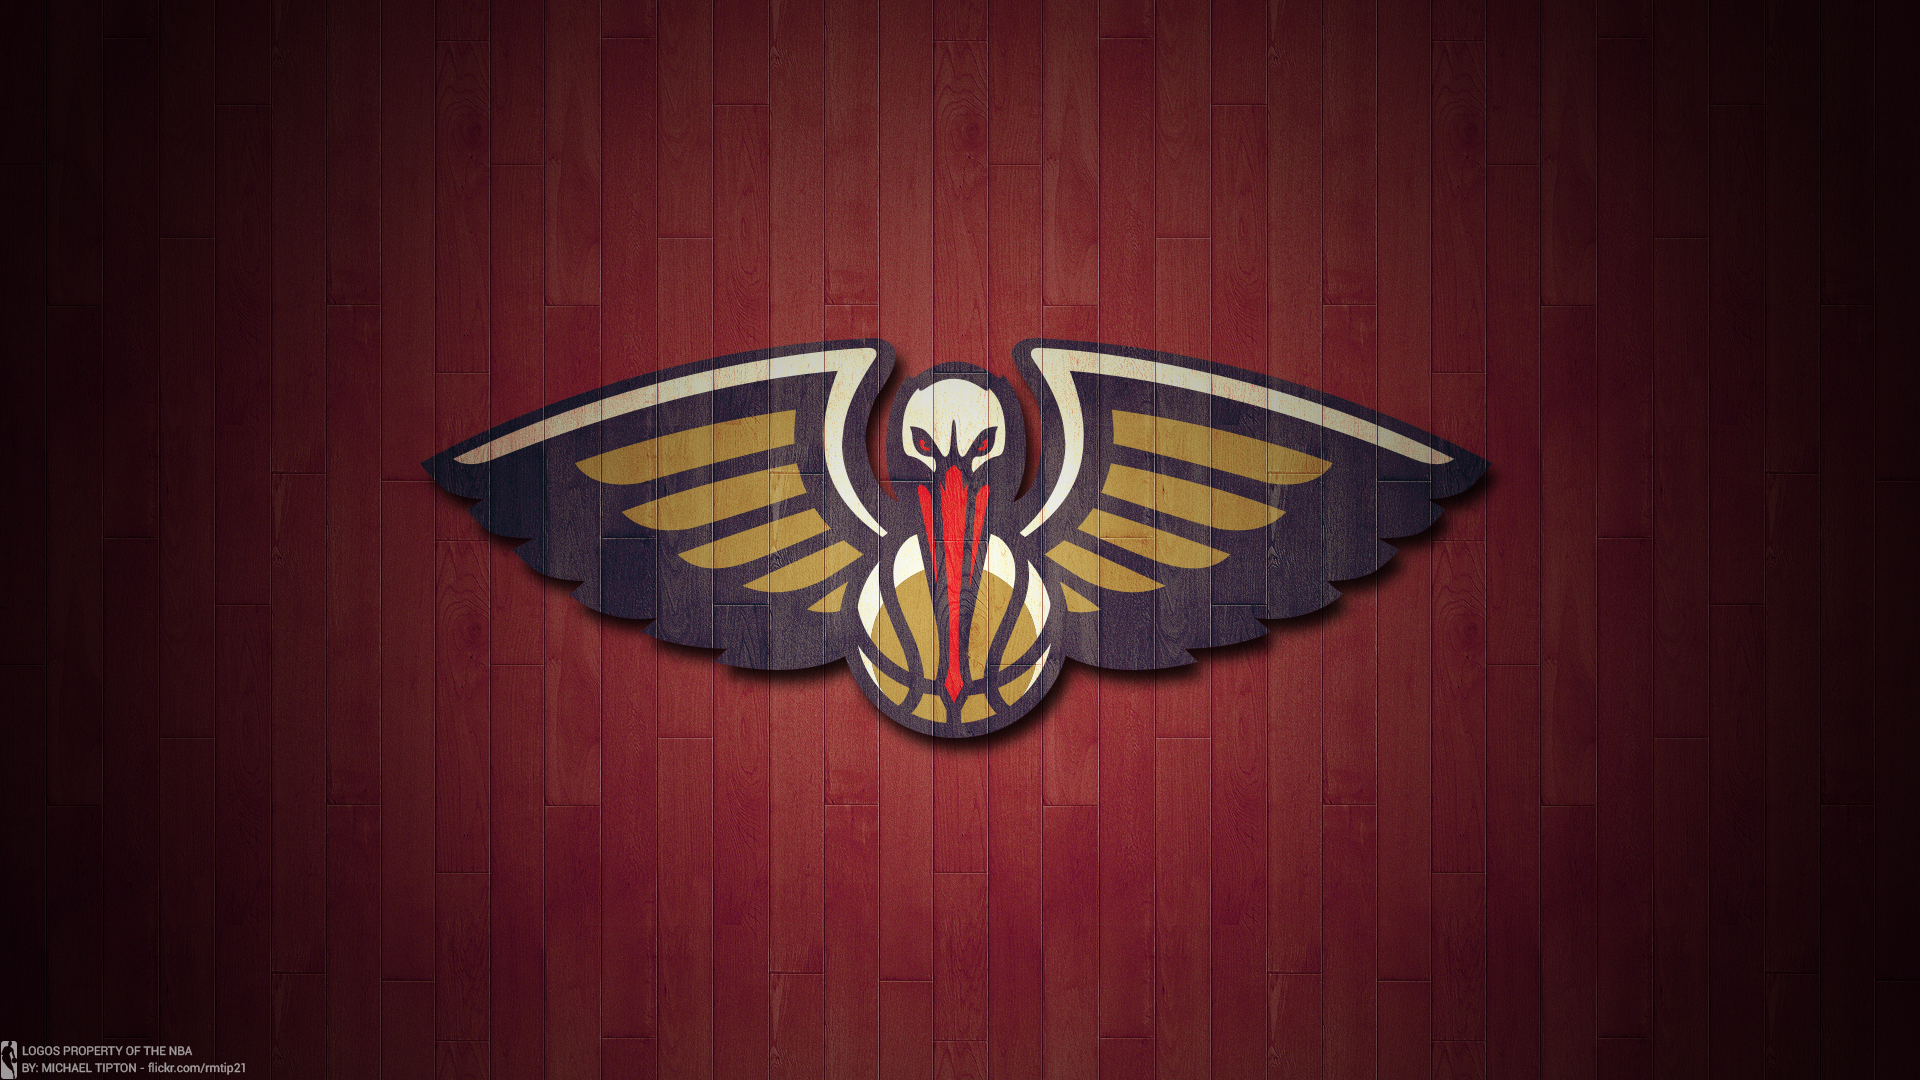 New Orleans Pelicans HD Wallpaper Background Image